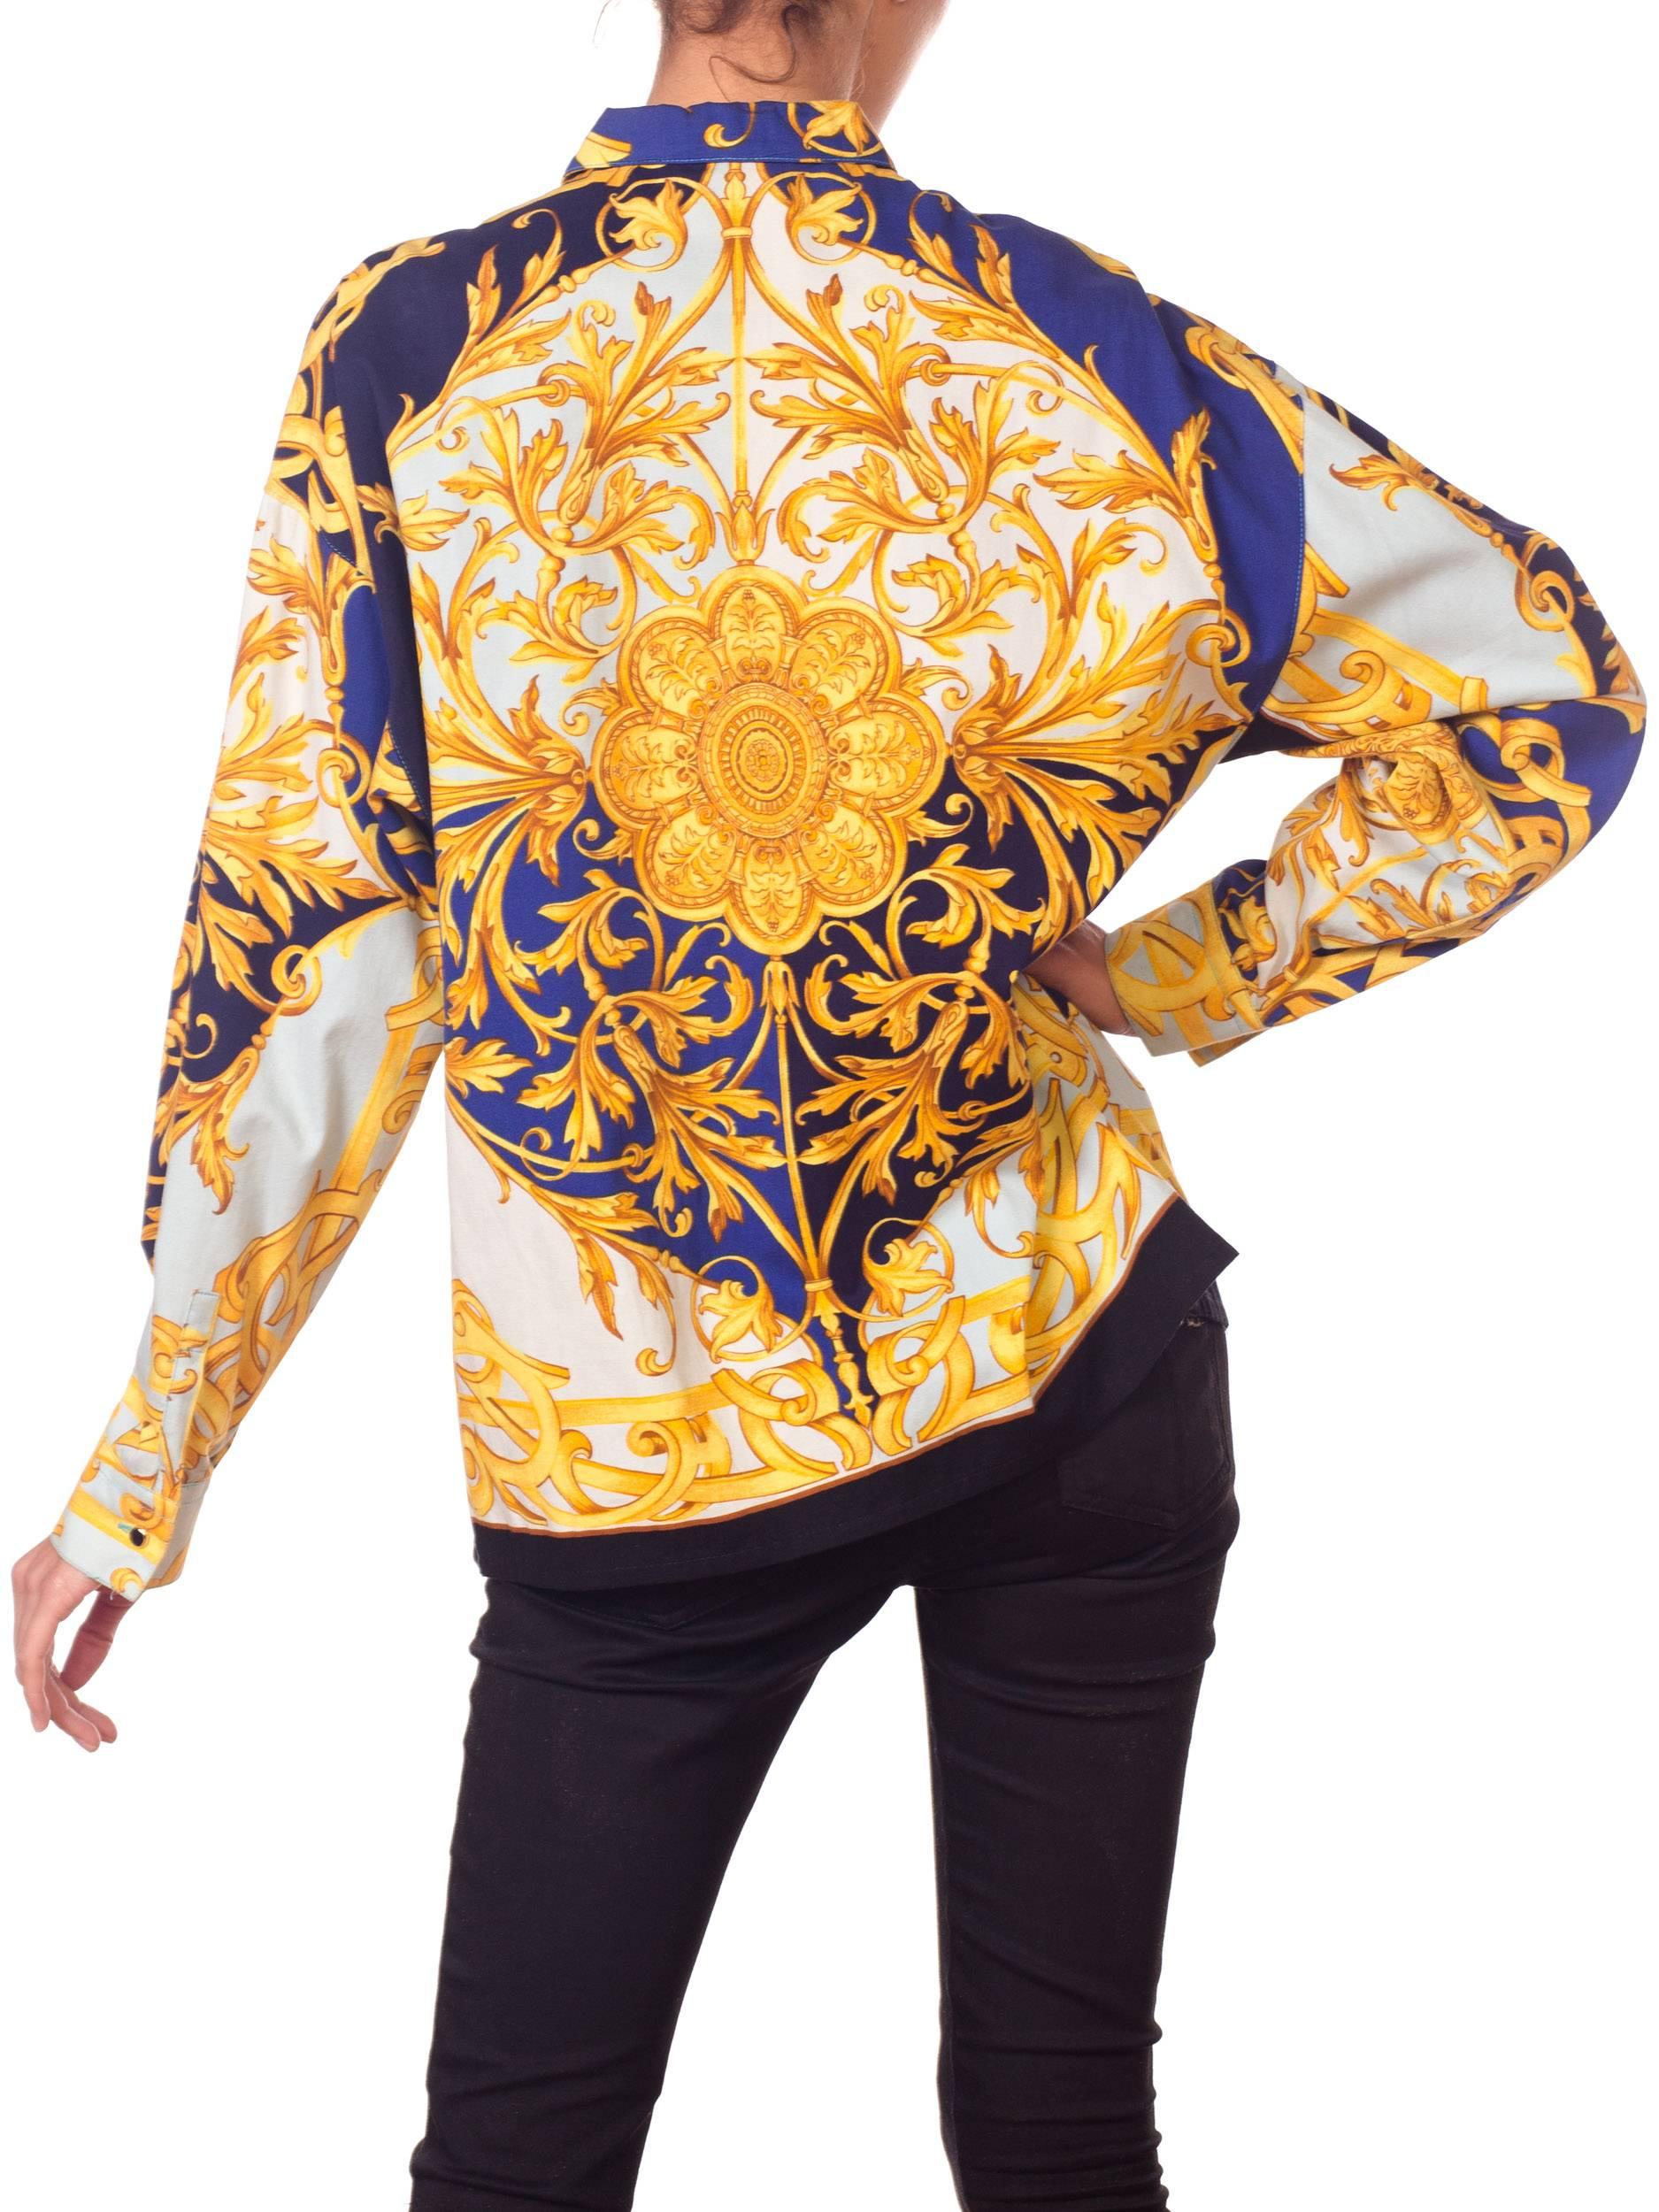 Women's 1990S VERSUS GIANNI VERSACE Blue & White Cotton Twill Gold Baroque Printed Long